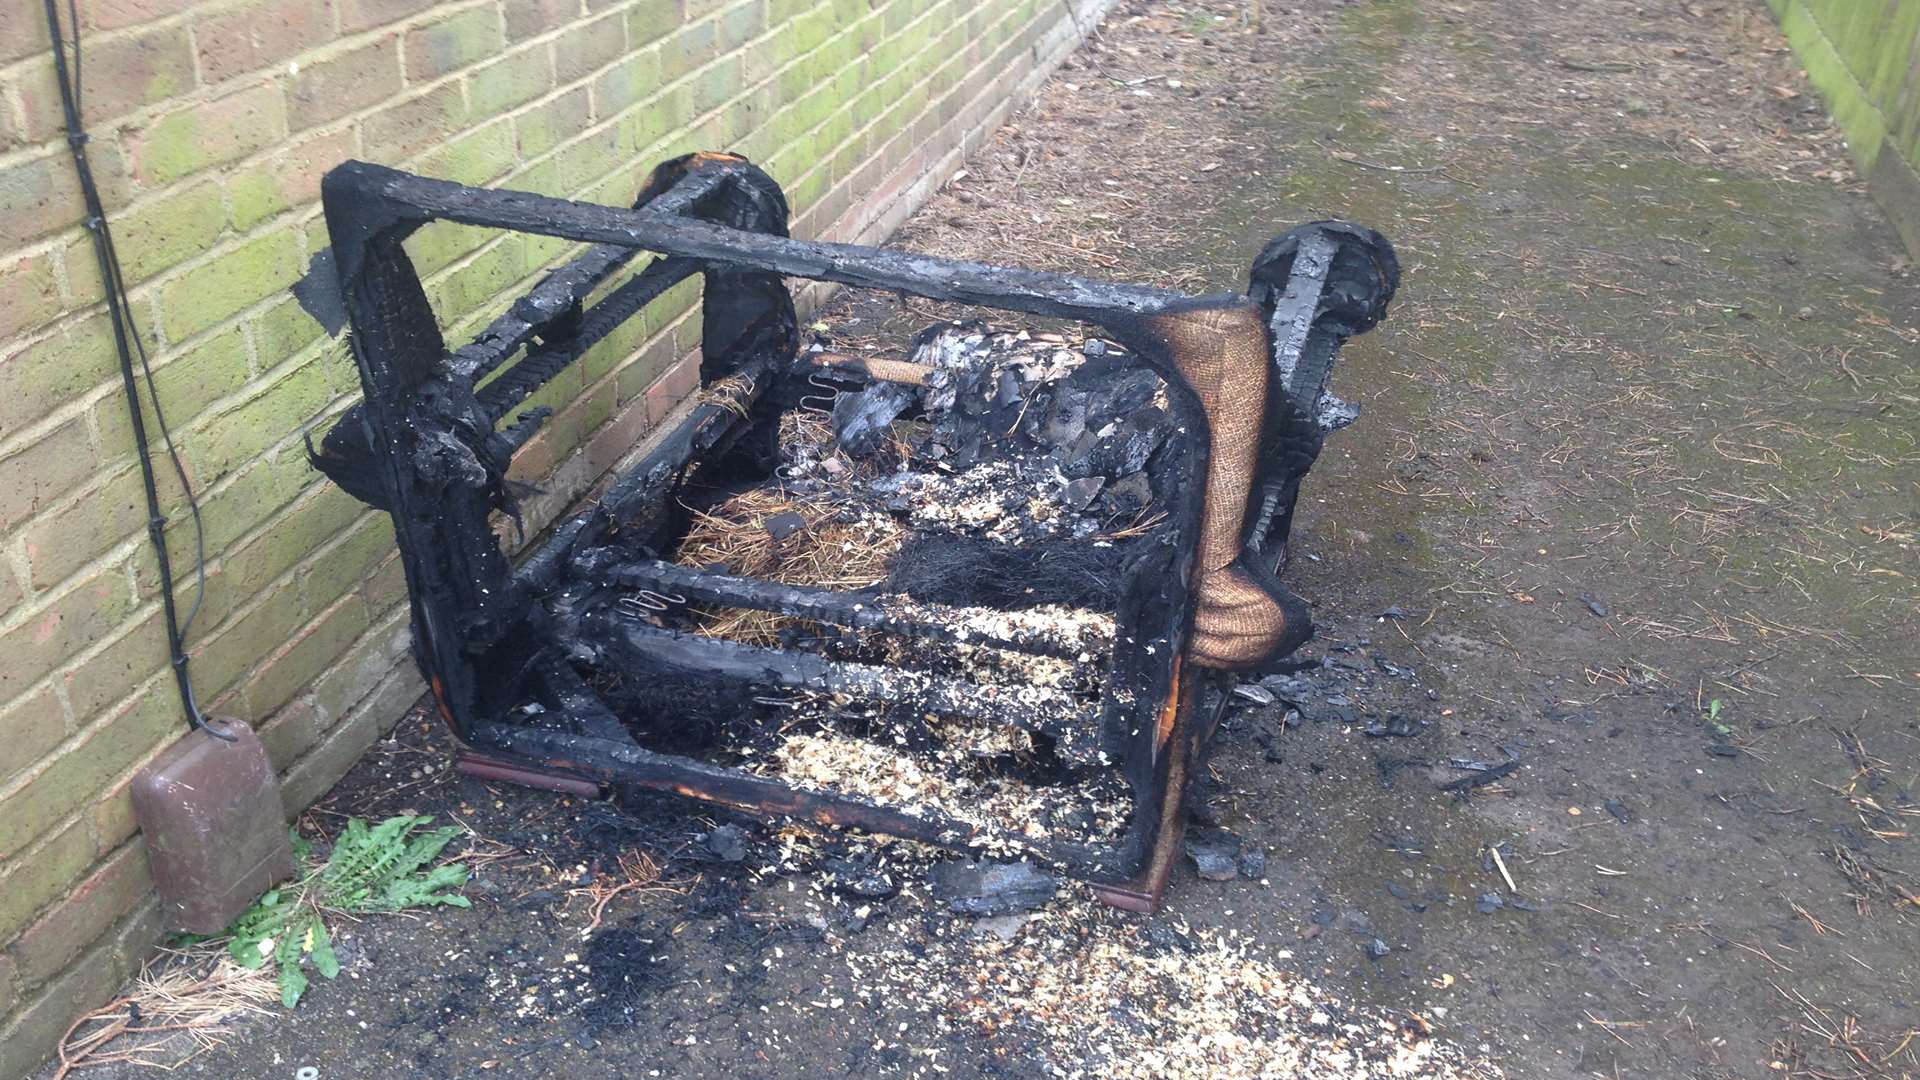 A seat was completely destroyed in the fire